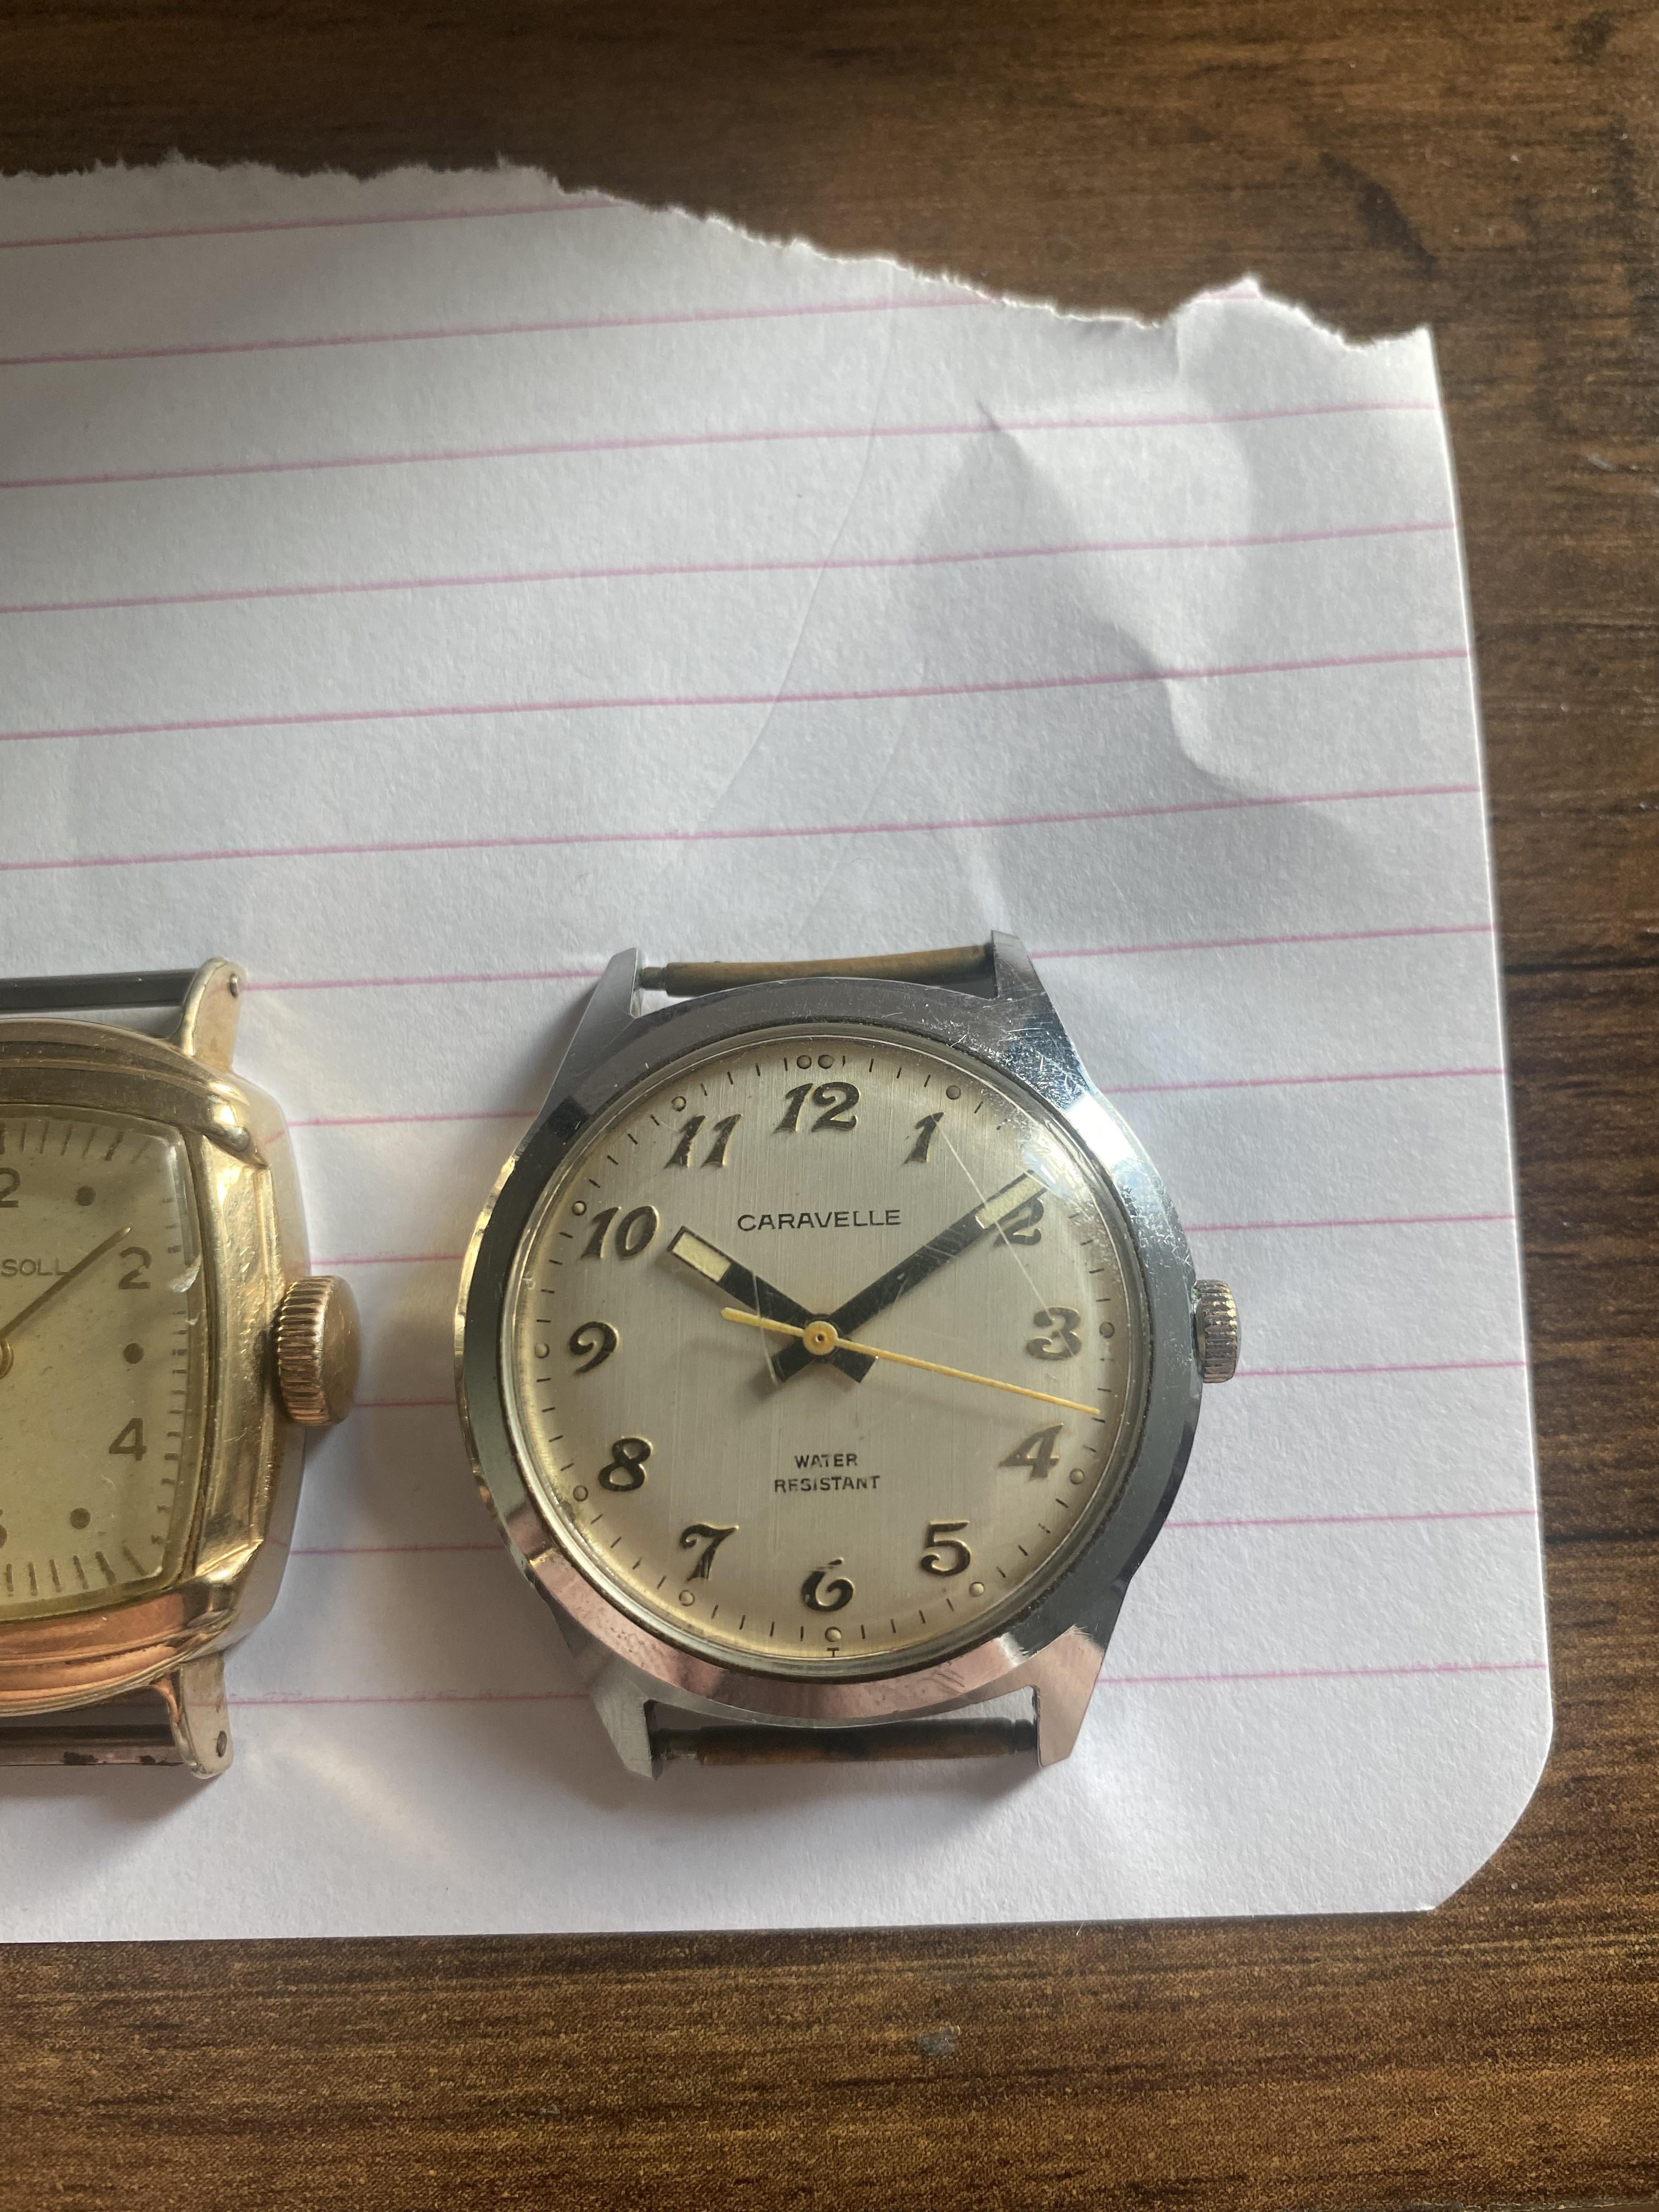 WTS] Vintage Watches for Parts/Repair (Waltham, Caravelle